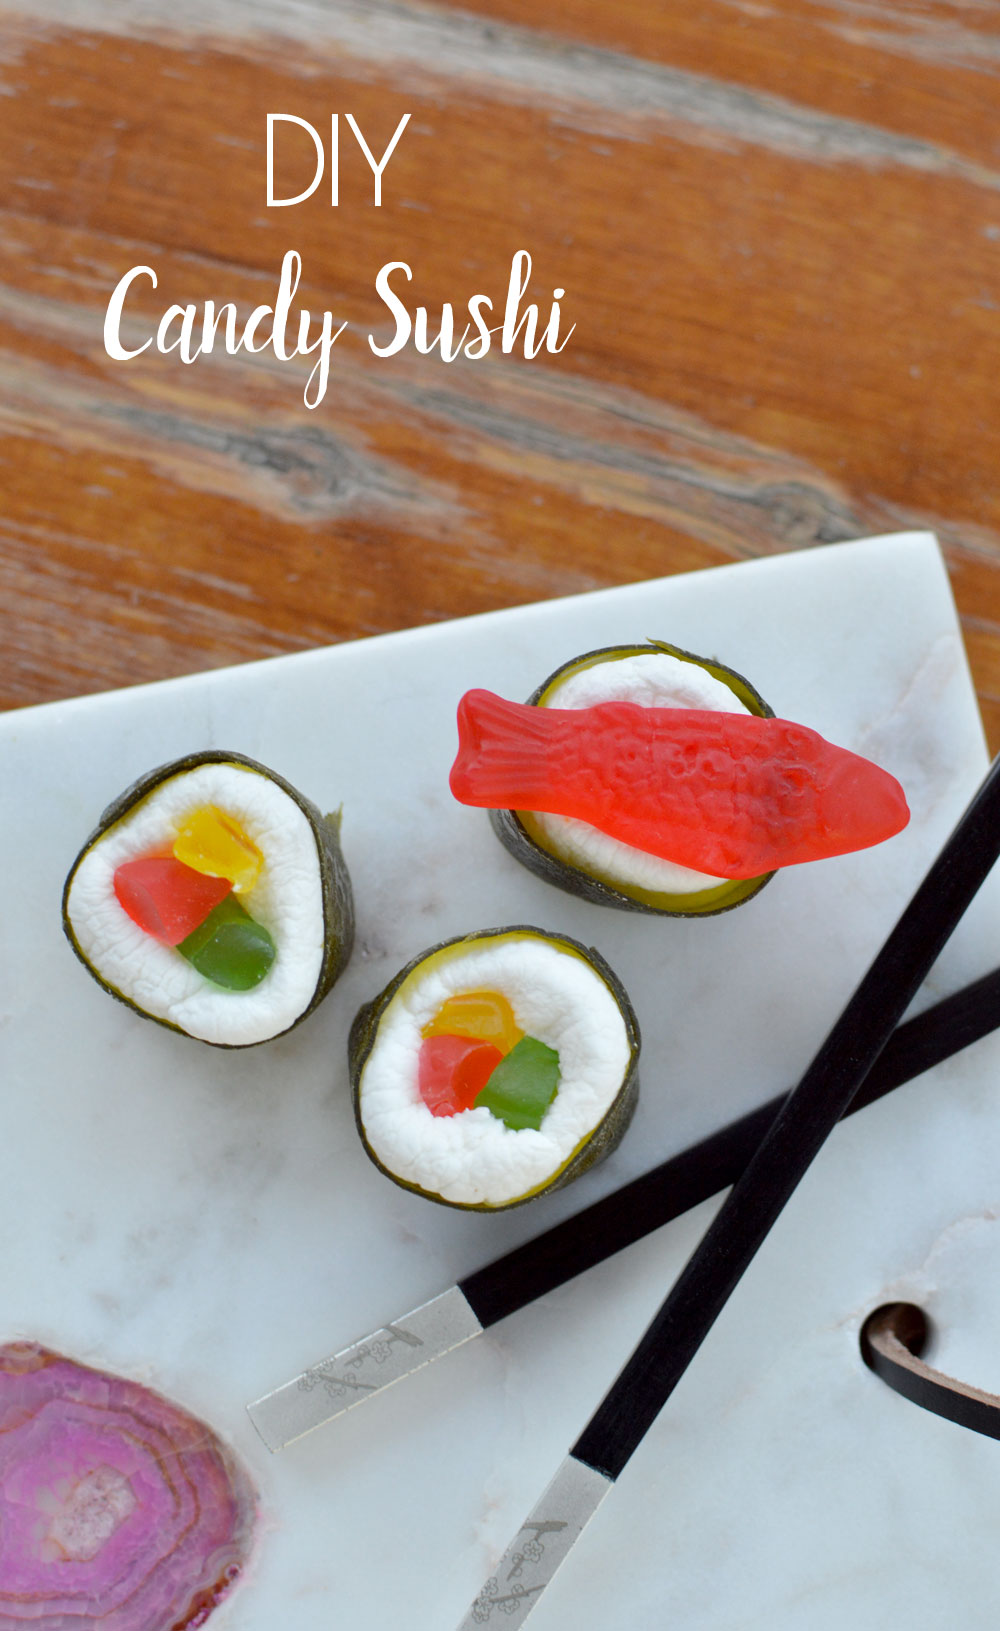 Creative party idea DIY candy sushi with fruit roll-ups, marshmallows, and gummy candy